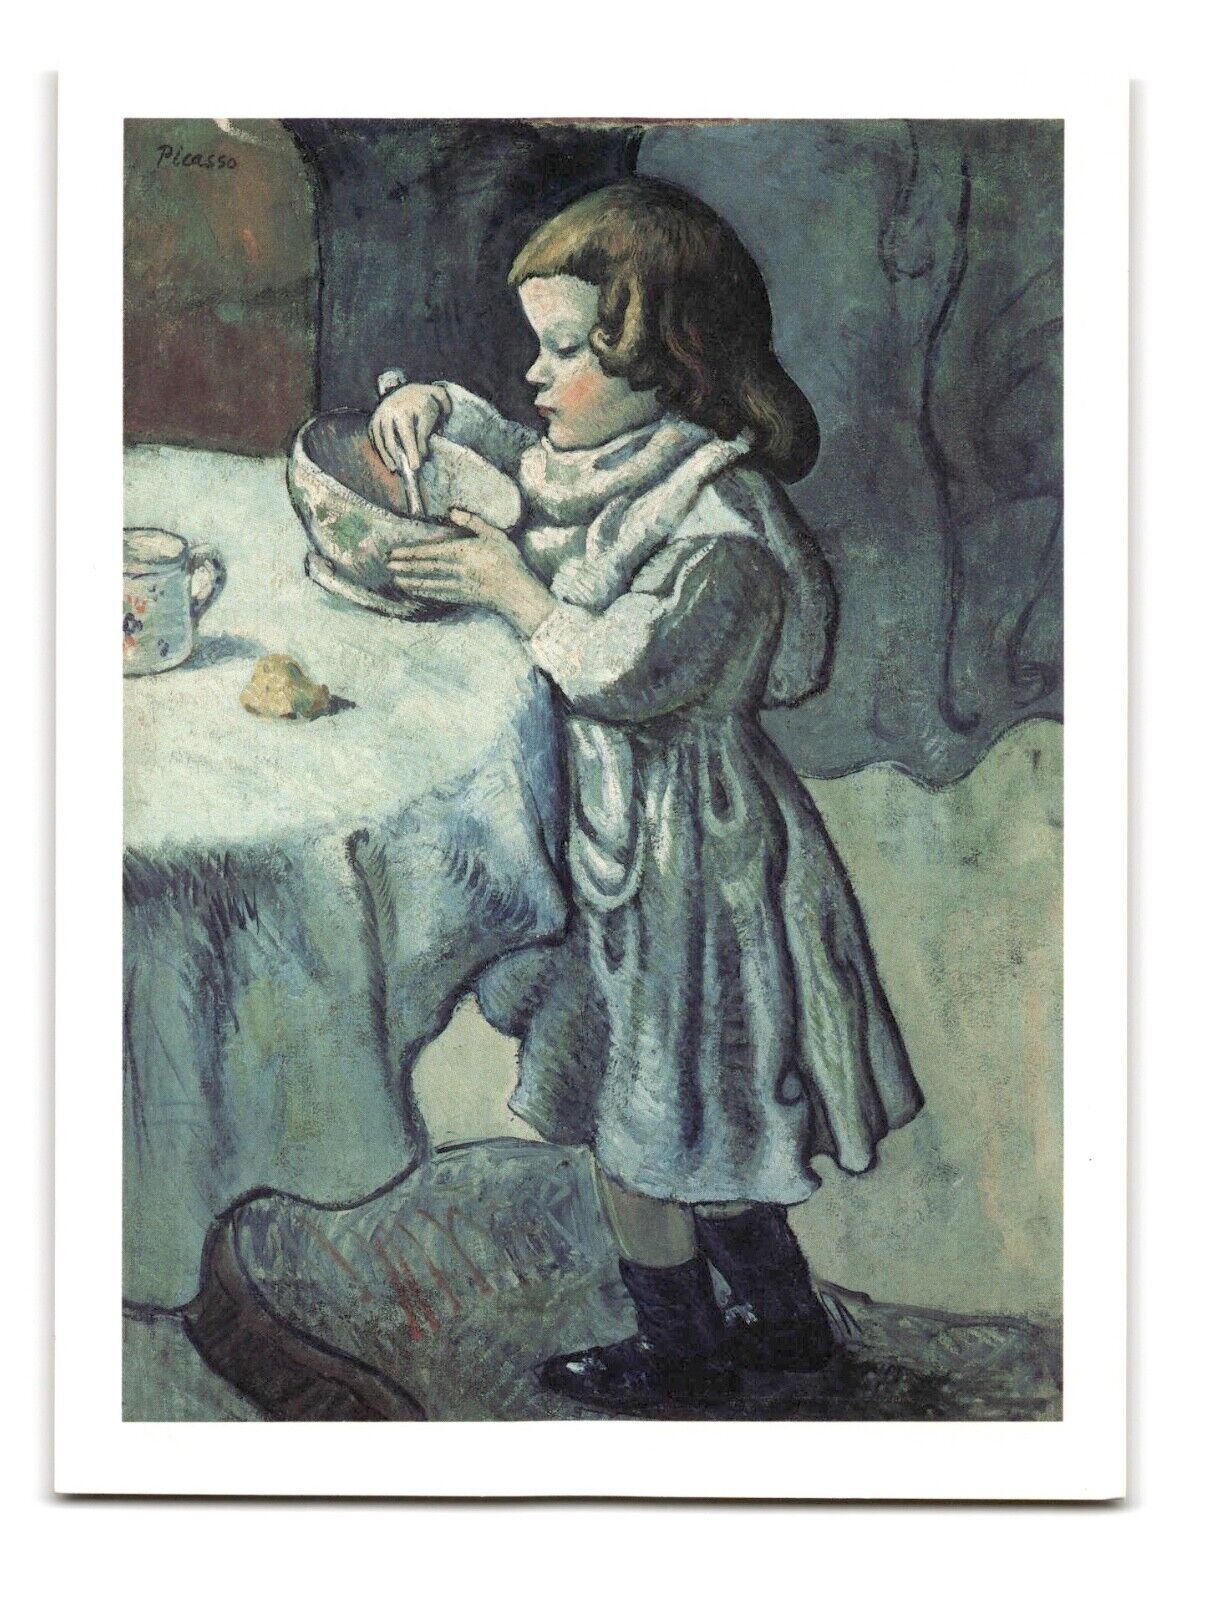 Picasso 'Le Gourmet' Early Painting Art Postcard - Chester Dale Collection